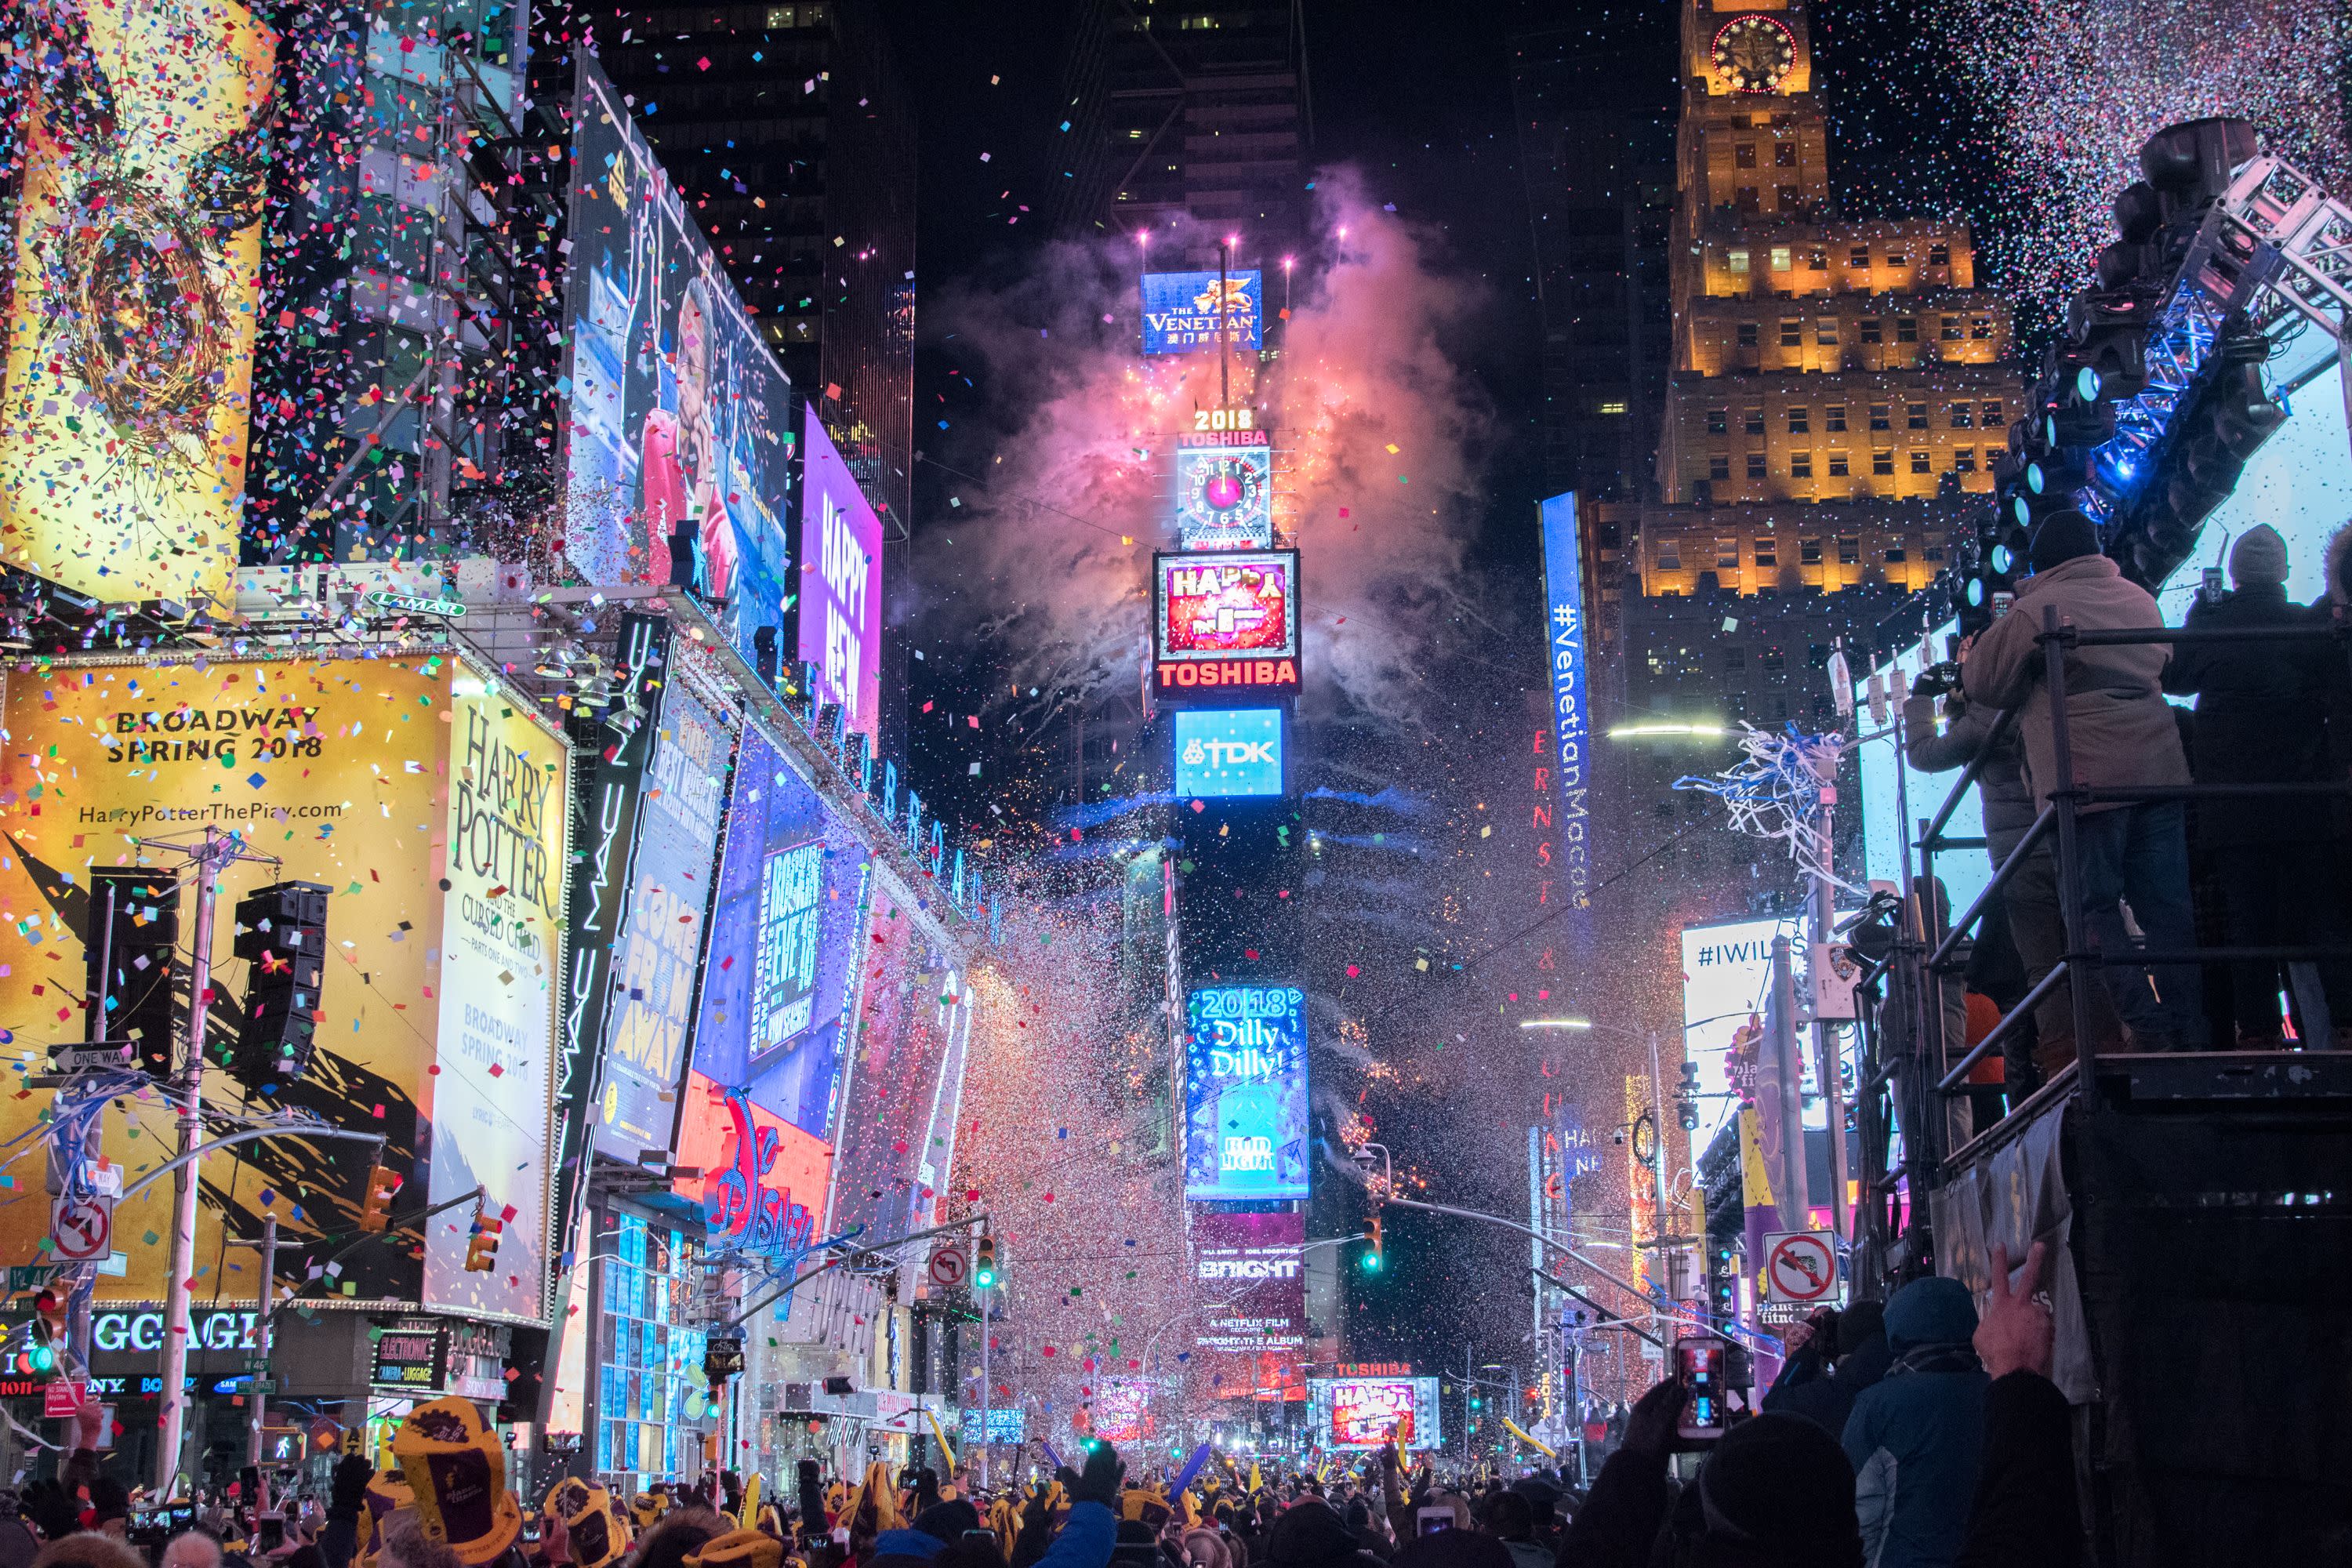 How To Watch The Times Square Ball Drop On New Year’s Eve